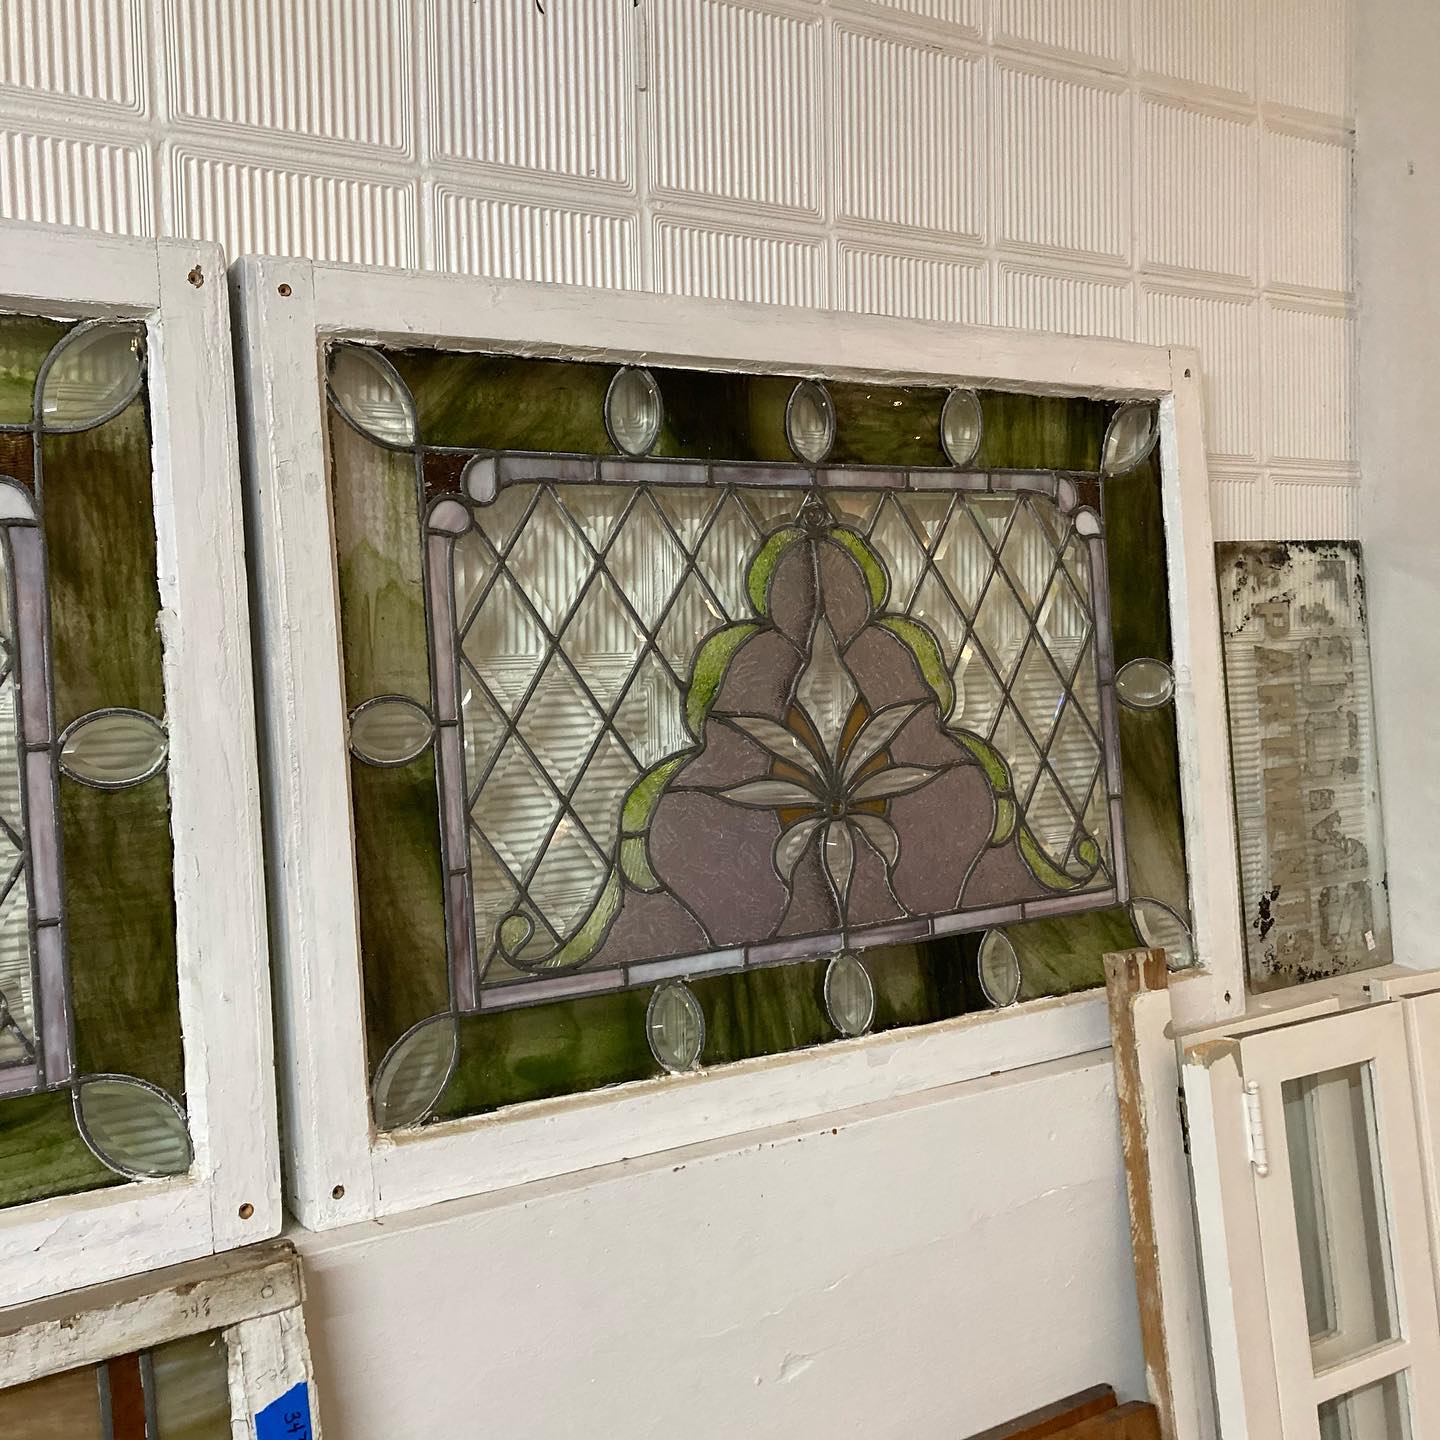 Antique Beveled Stained Glass Windows